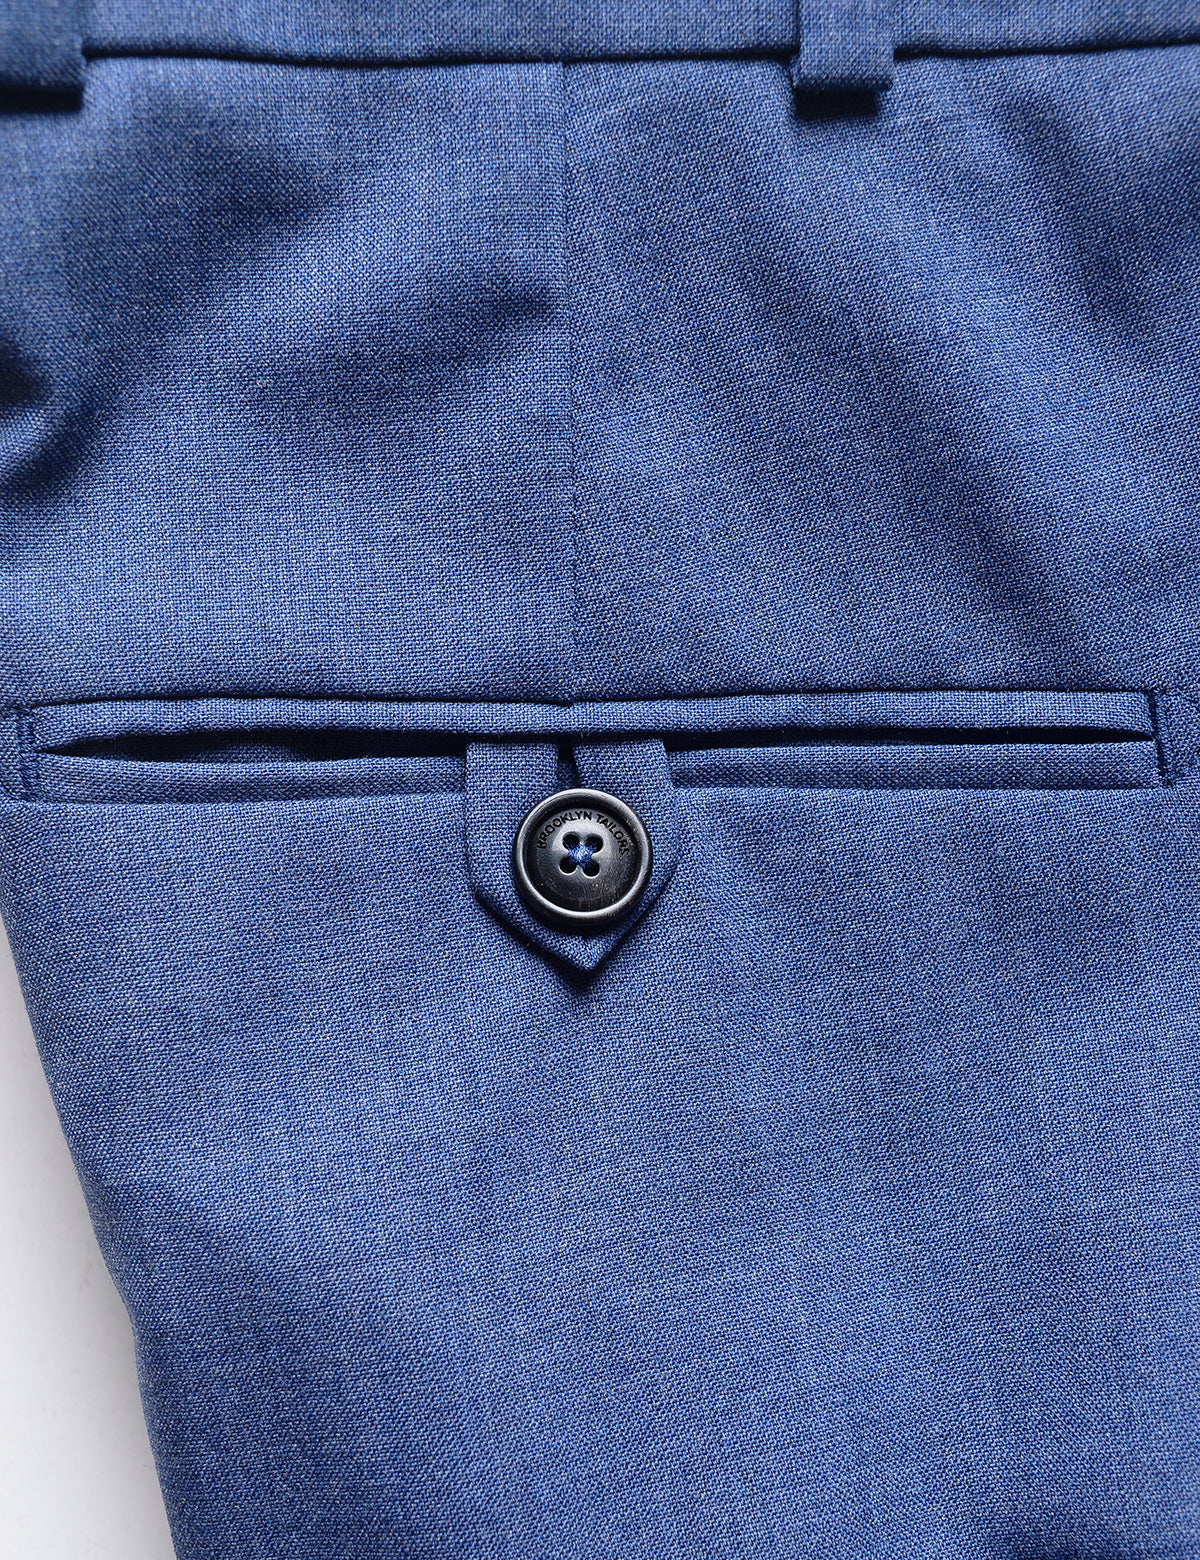 Detail shot of Brooklyn Tailors BKT50 Tailored Trousers in Heathered Wool - San Marino Blue showing back pocket 